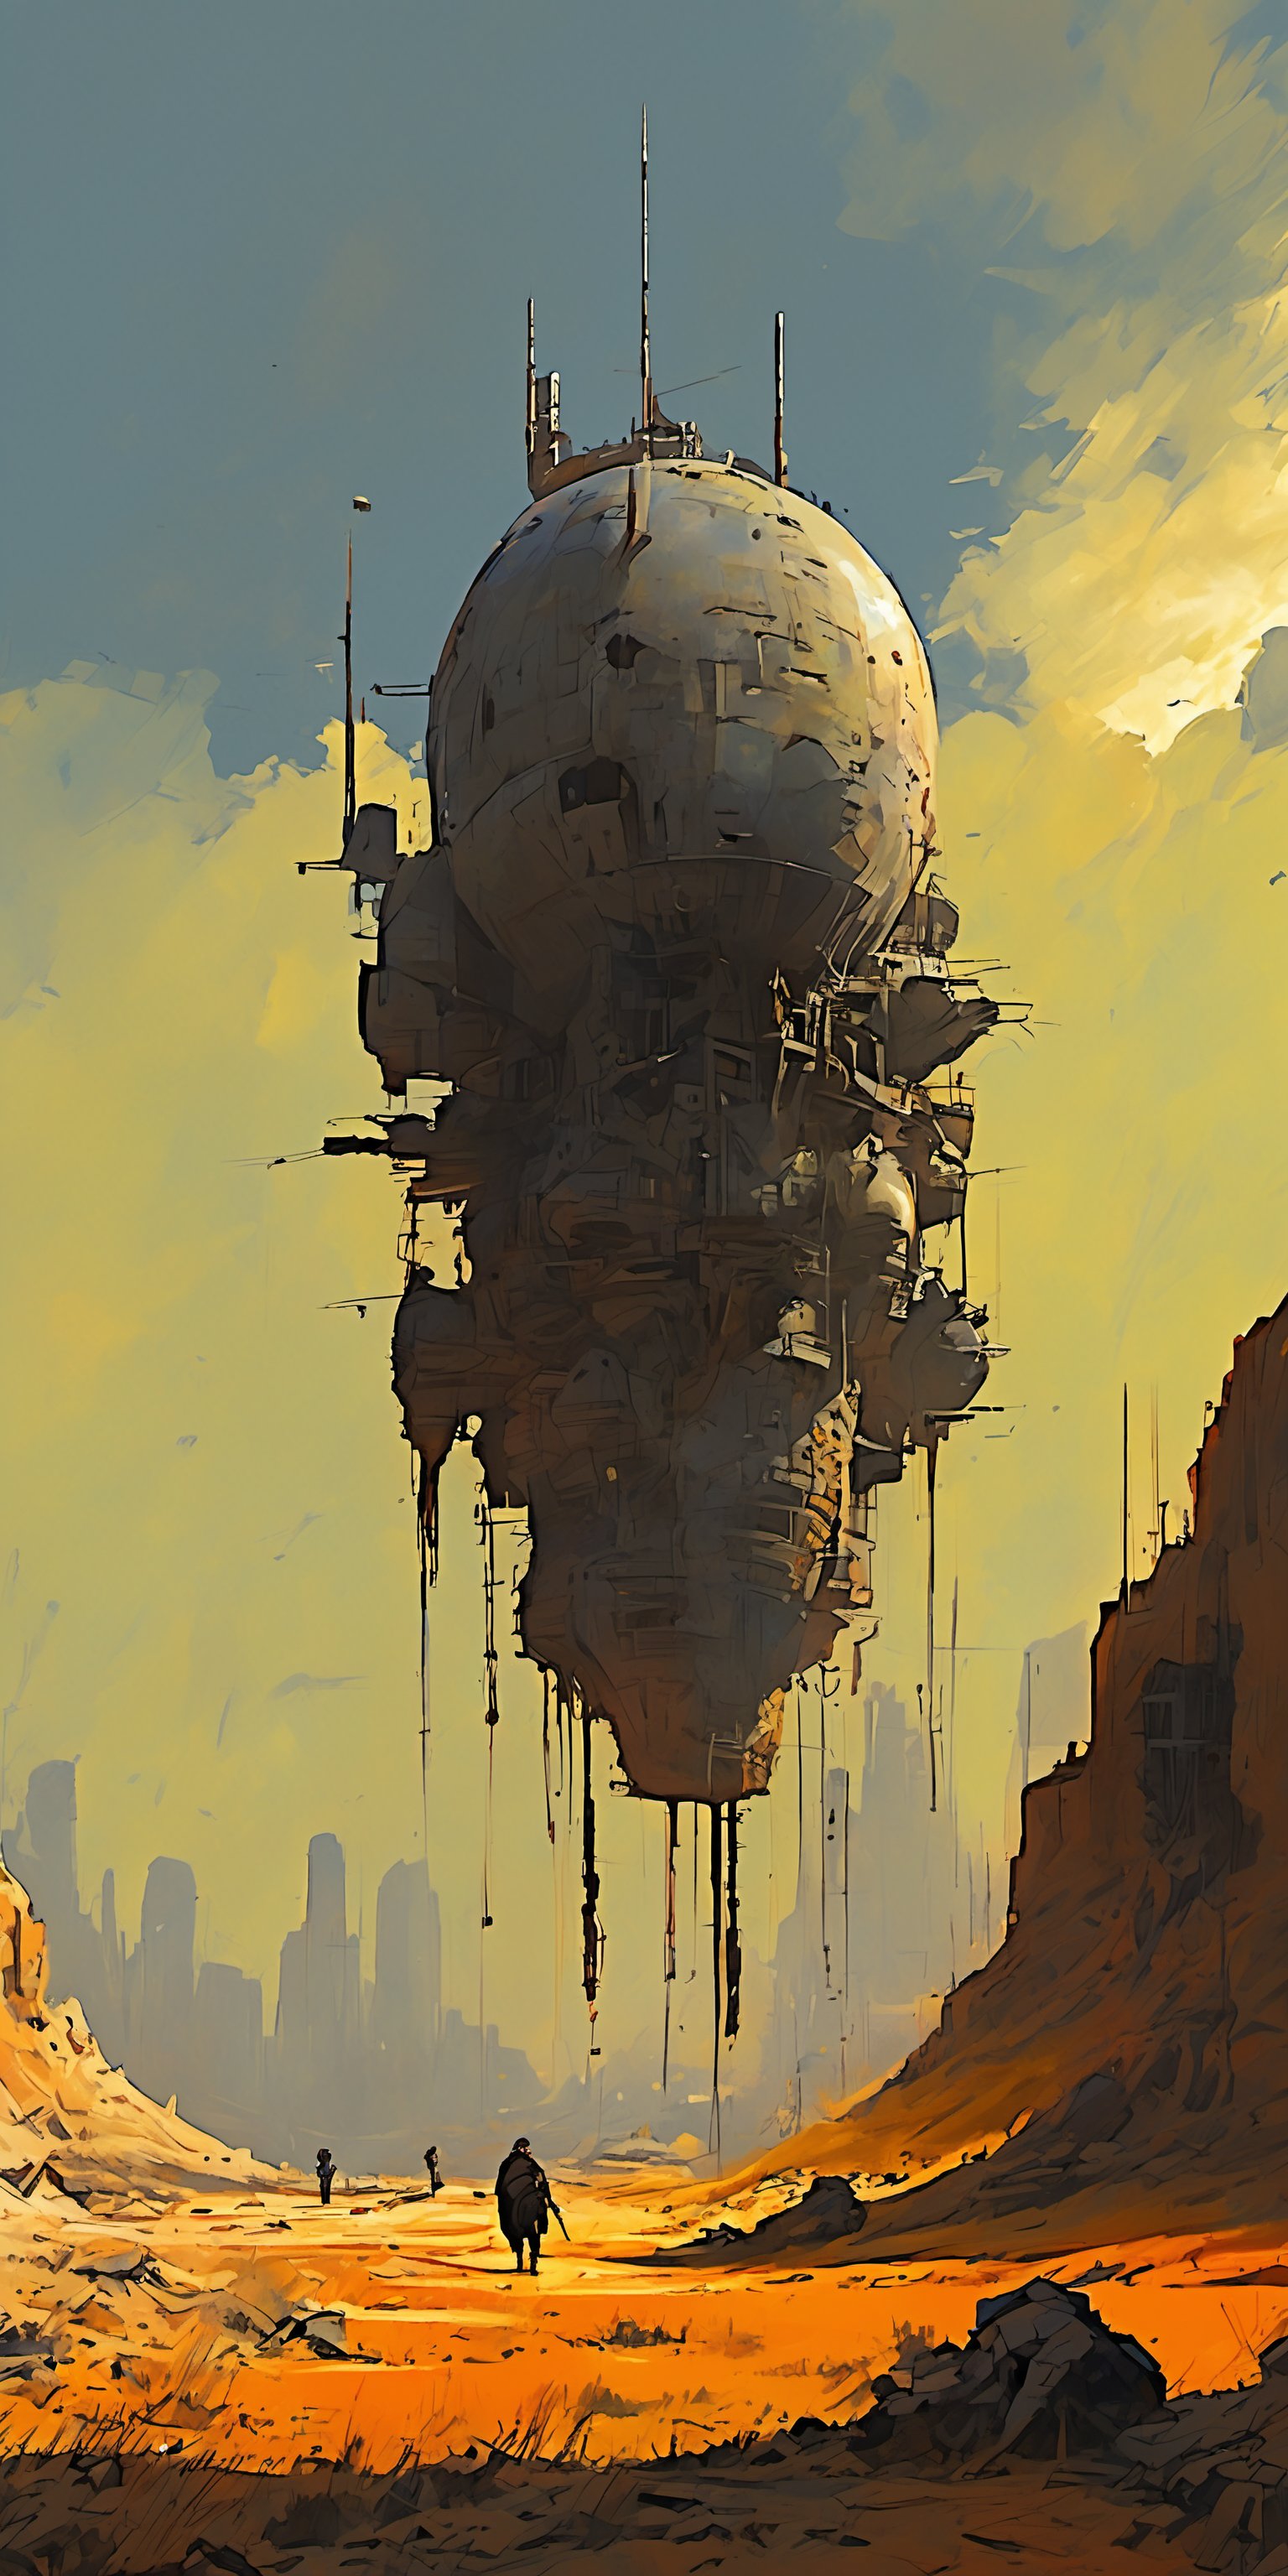 "An alien, futuristic structure floats in the foreground. A bright afternoon landscape with hard, sharp shadows. The sun is high in the sky, casting a strong, direct light. The scene includes a clear sky with minimal clouds, and the sunlight creates a vivid contrast between light and shadow on the ground and objects. The overall atmosphere is warm and bright, capturing the essence of a sunny afternoon."